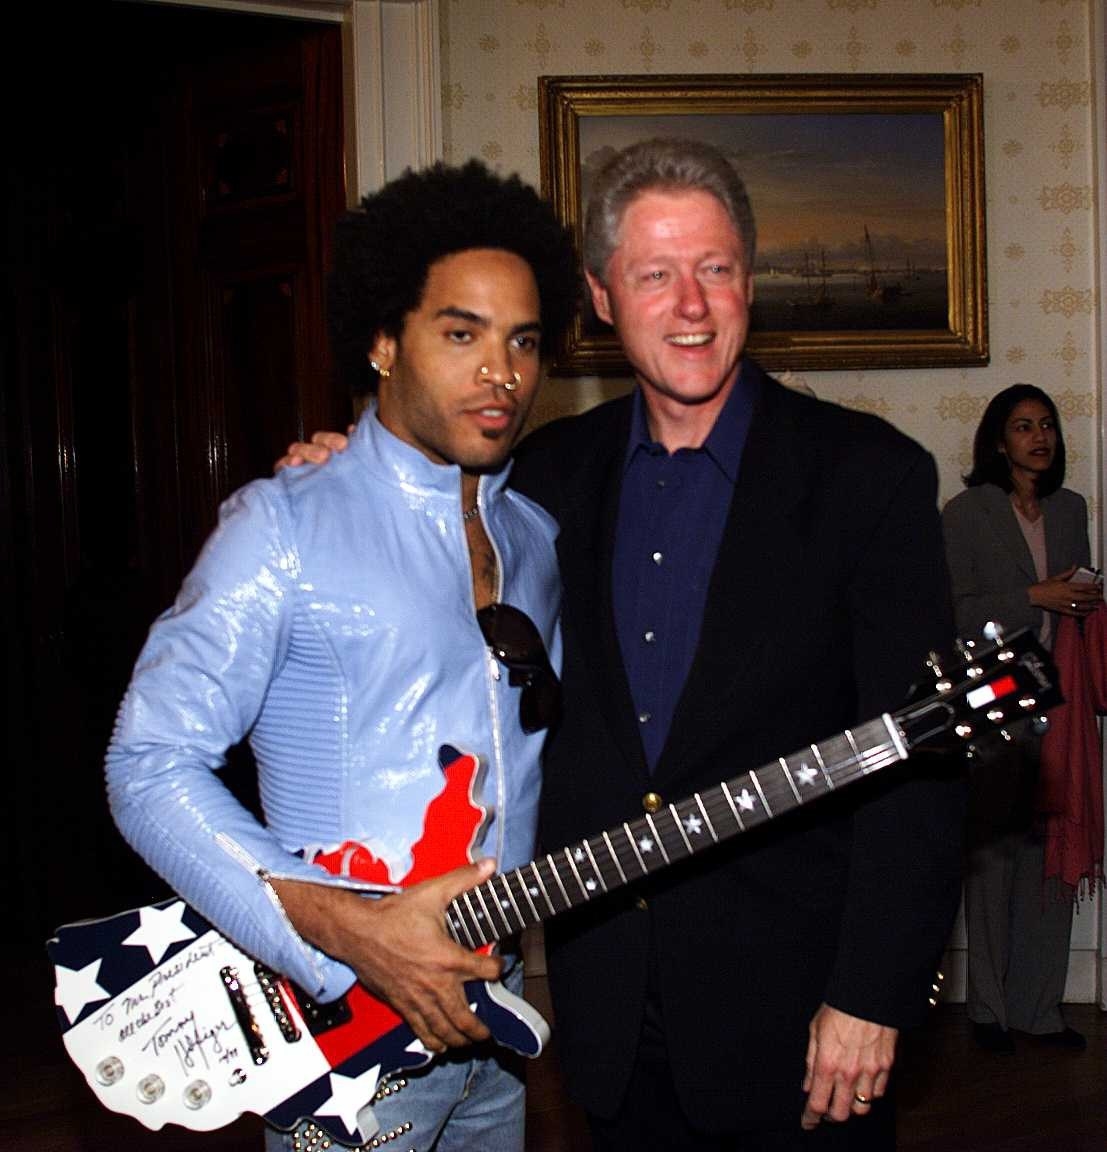 Lennie holding a guitar and standing with Bill Clinton